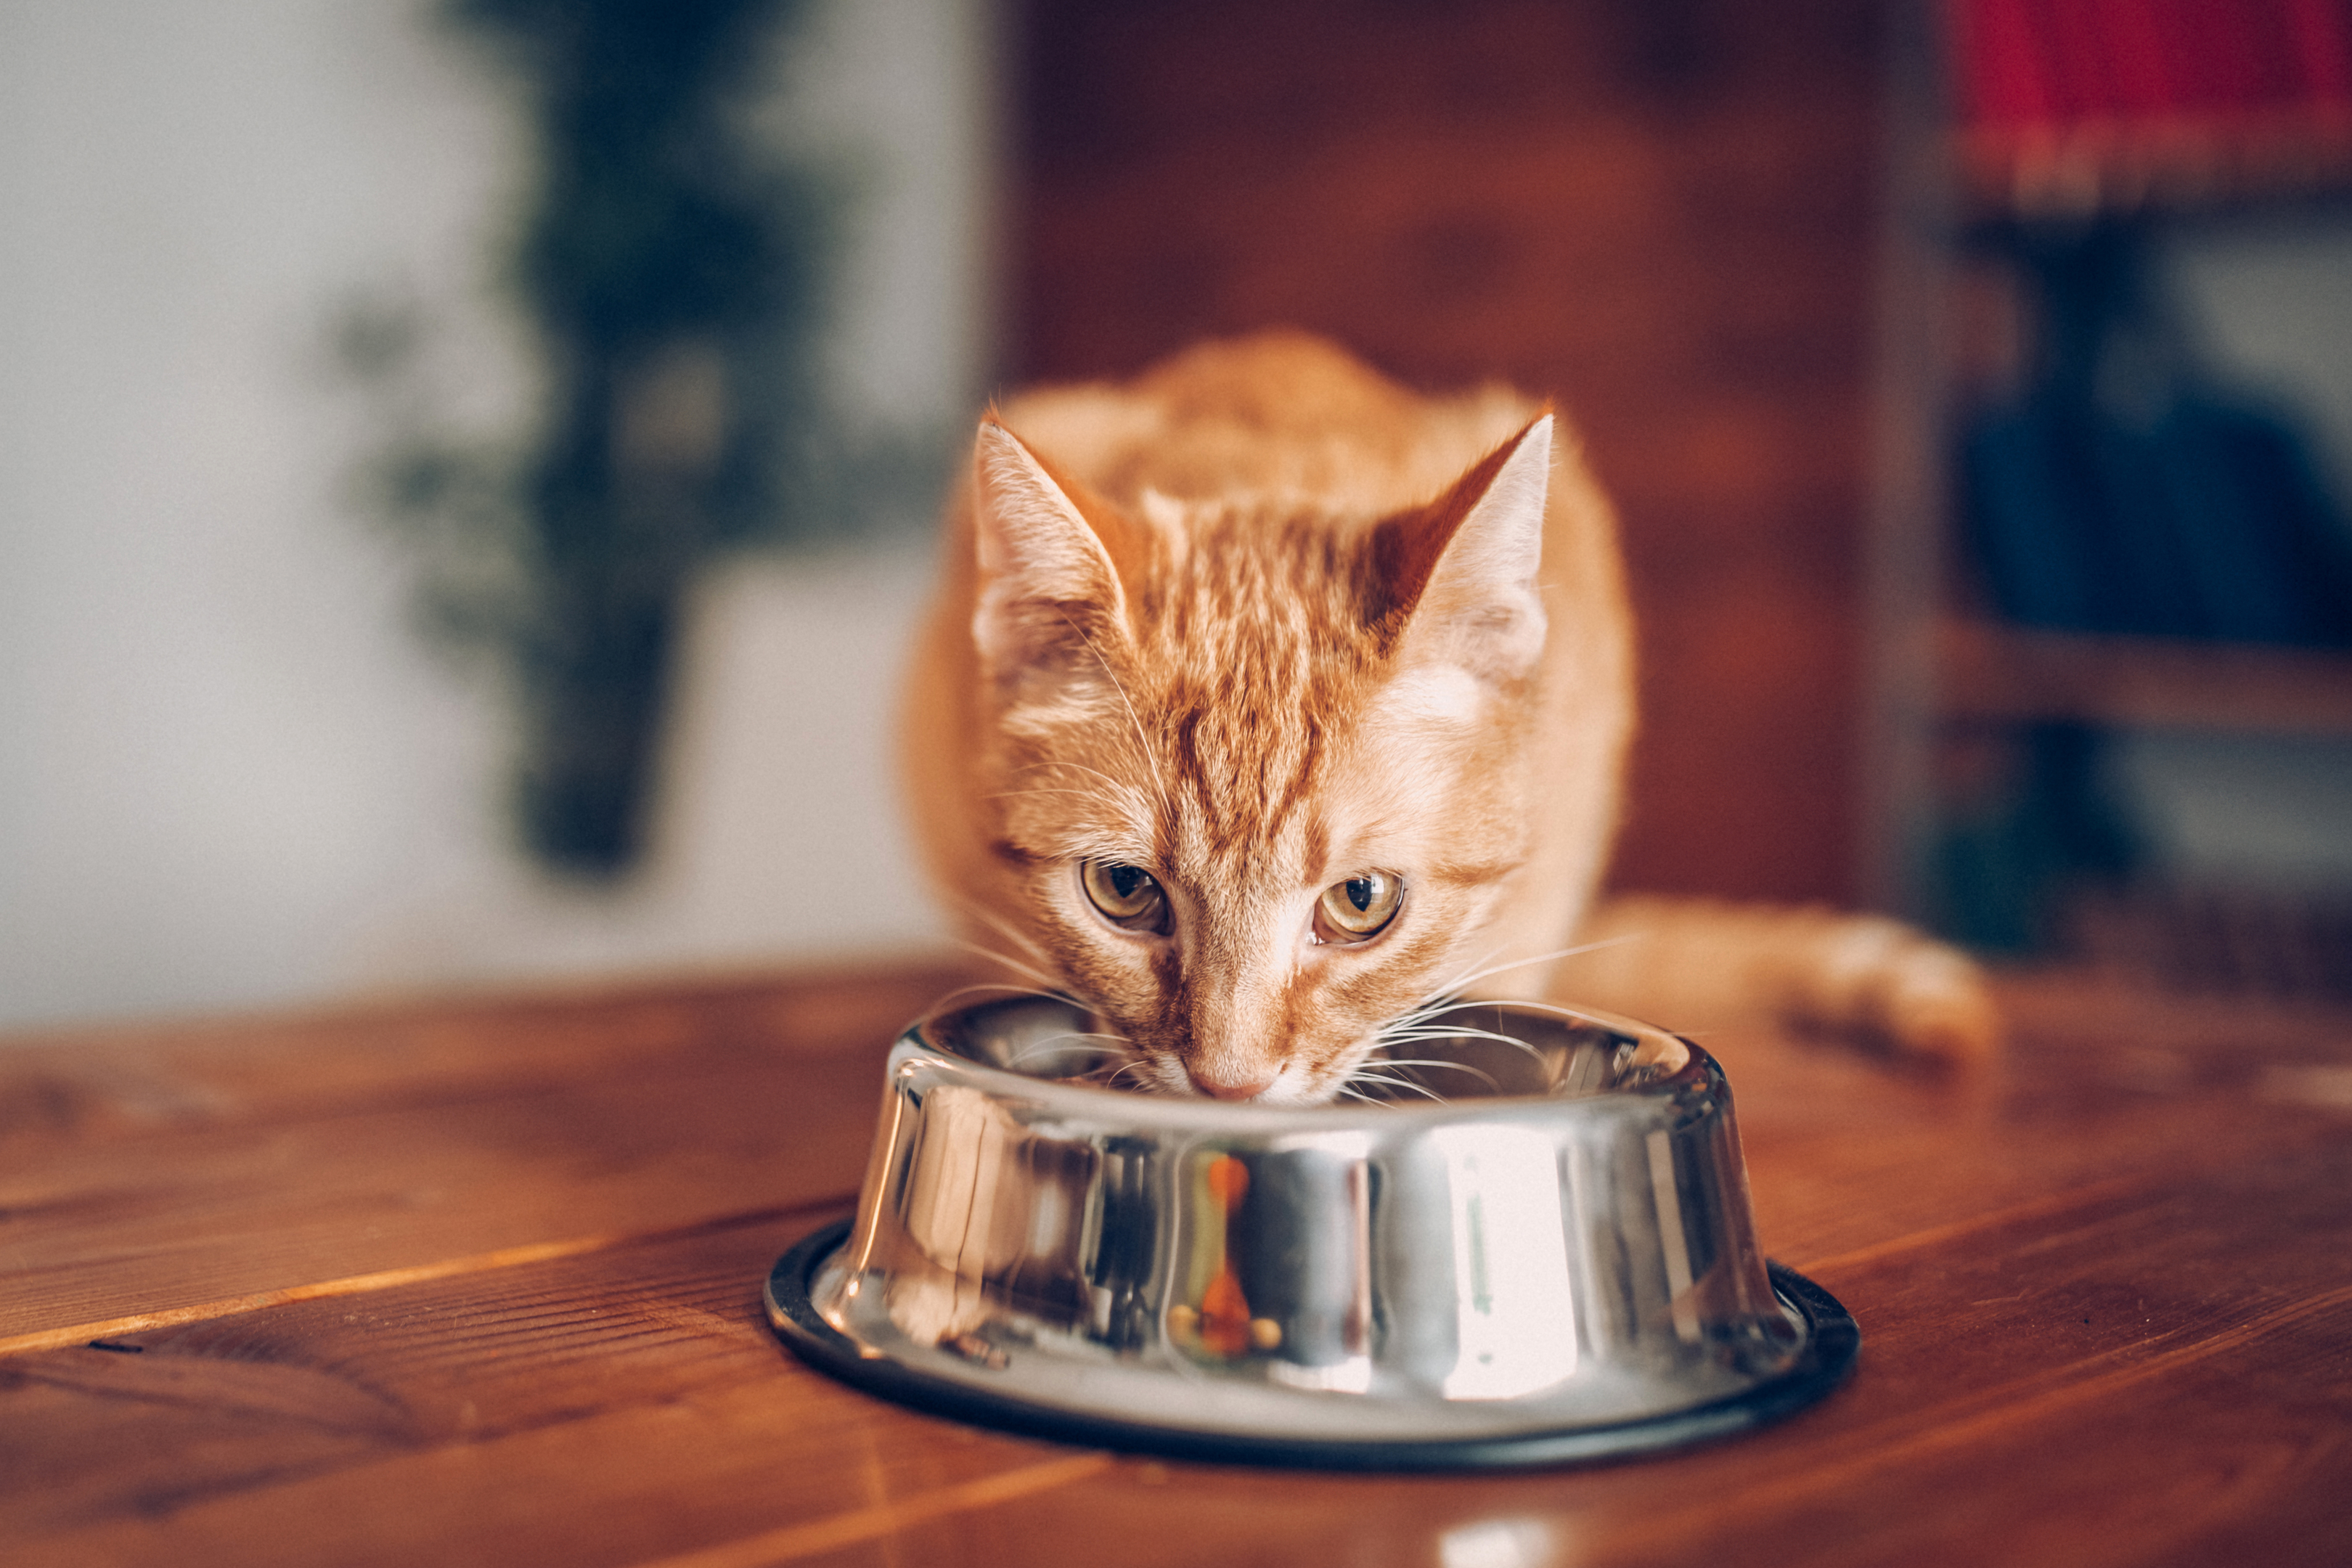 What Are You Feeding Your Cat? My Weekly